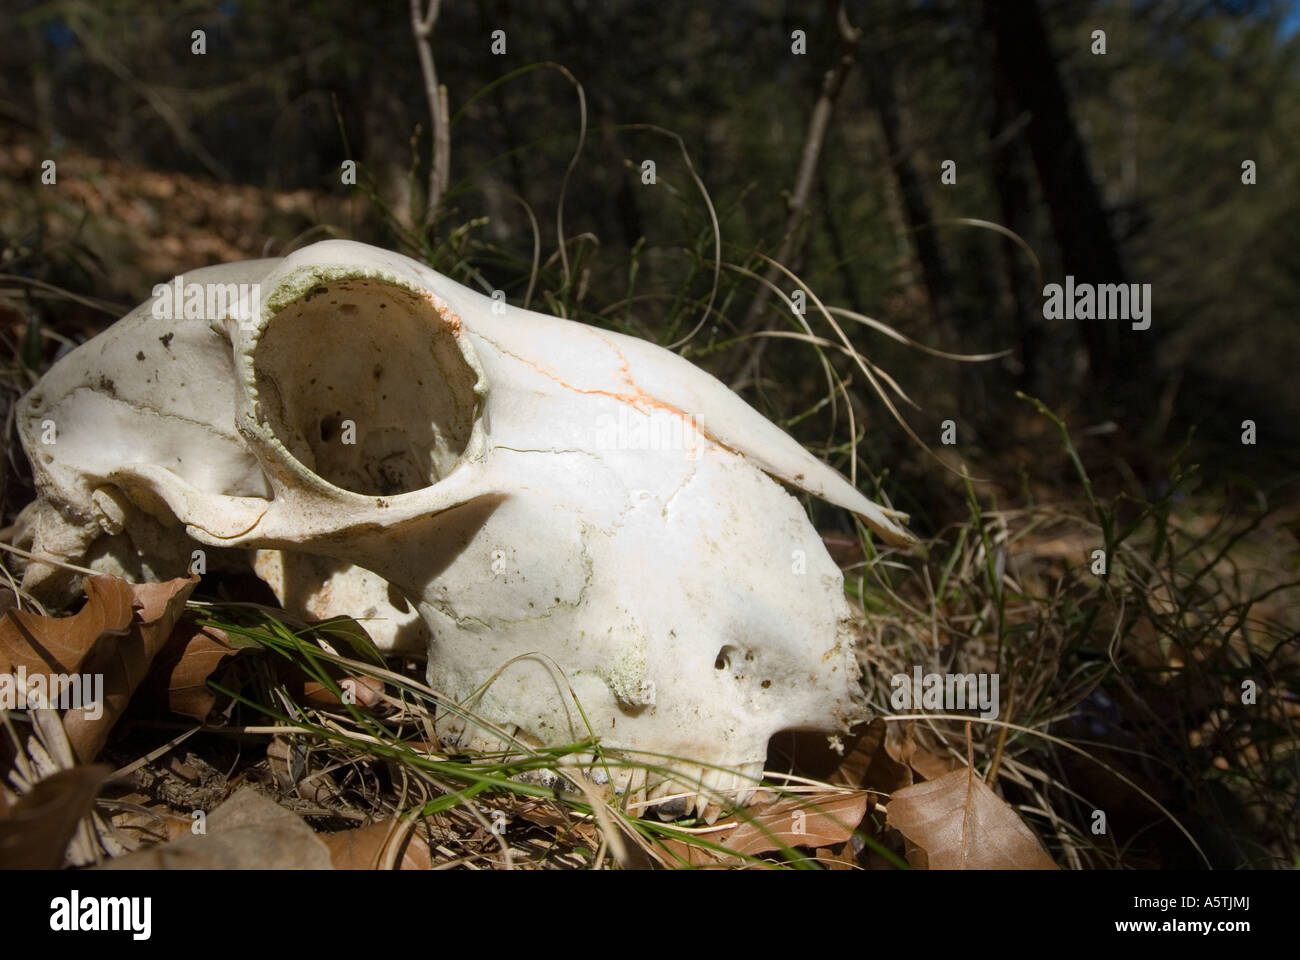 skull of a wild animal in a forest Stock Photo